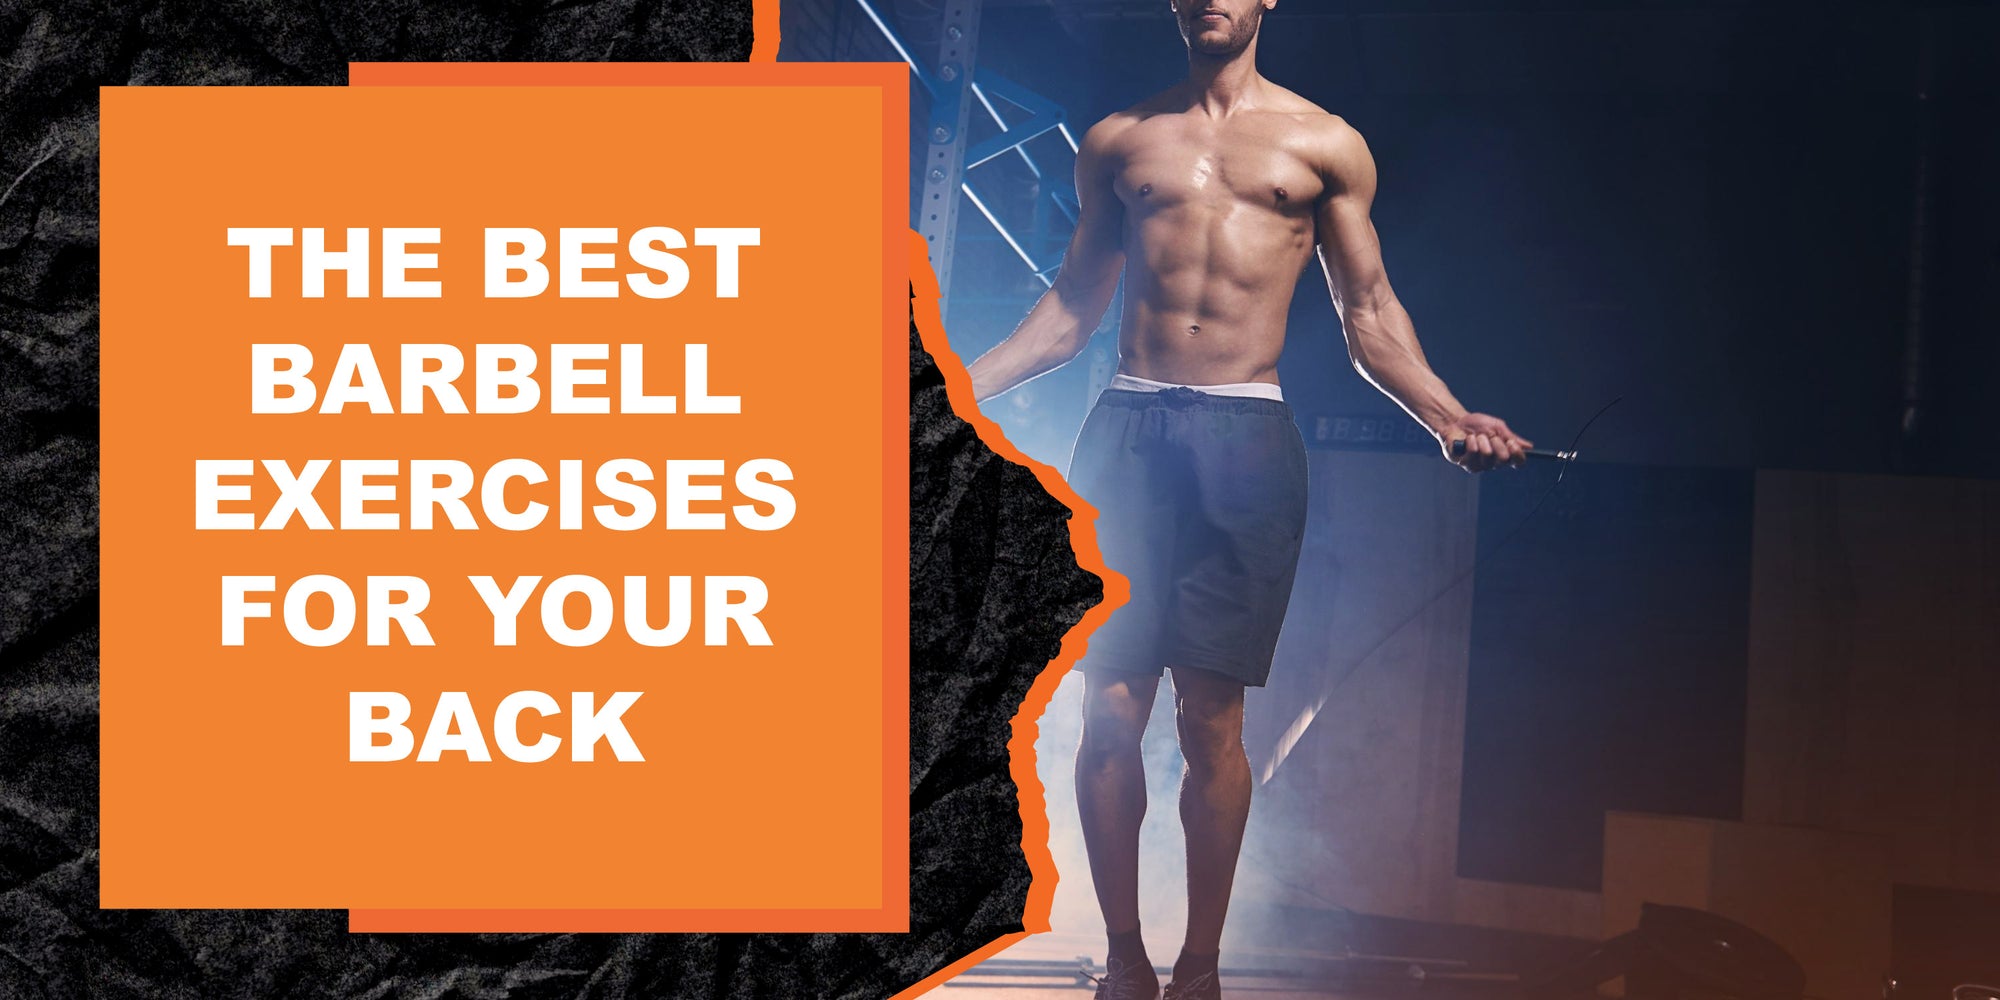 The Best Barbell Exercises for Your Back